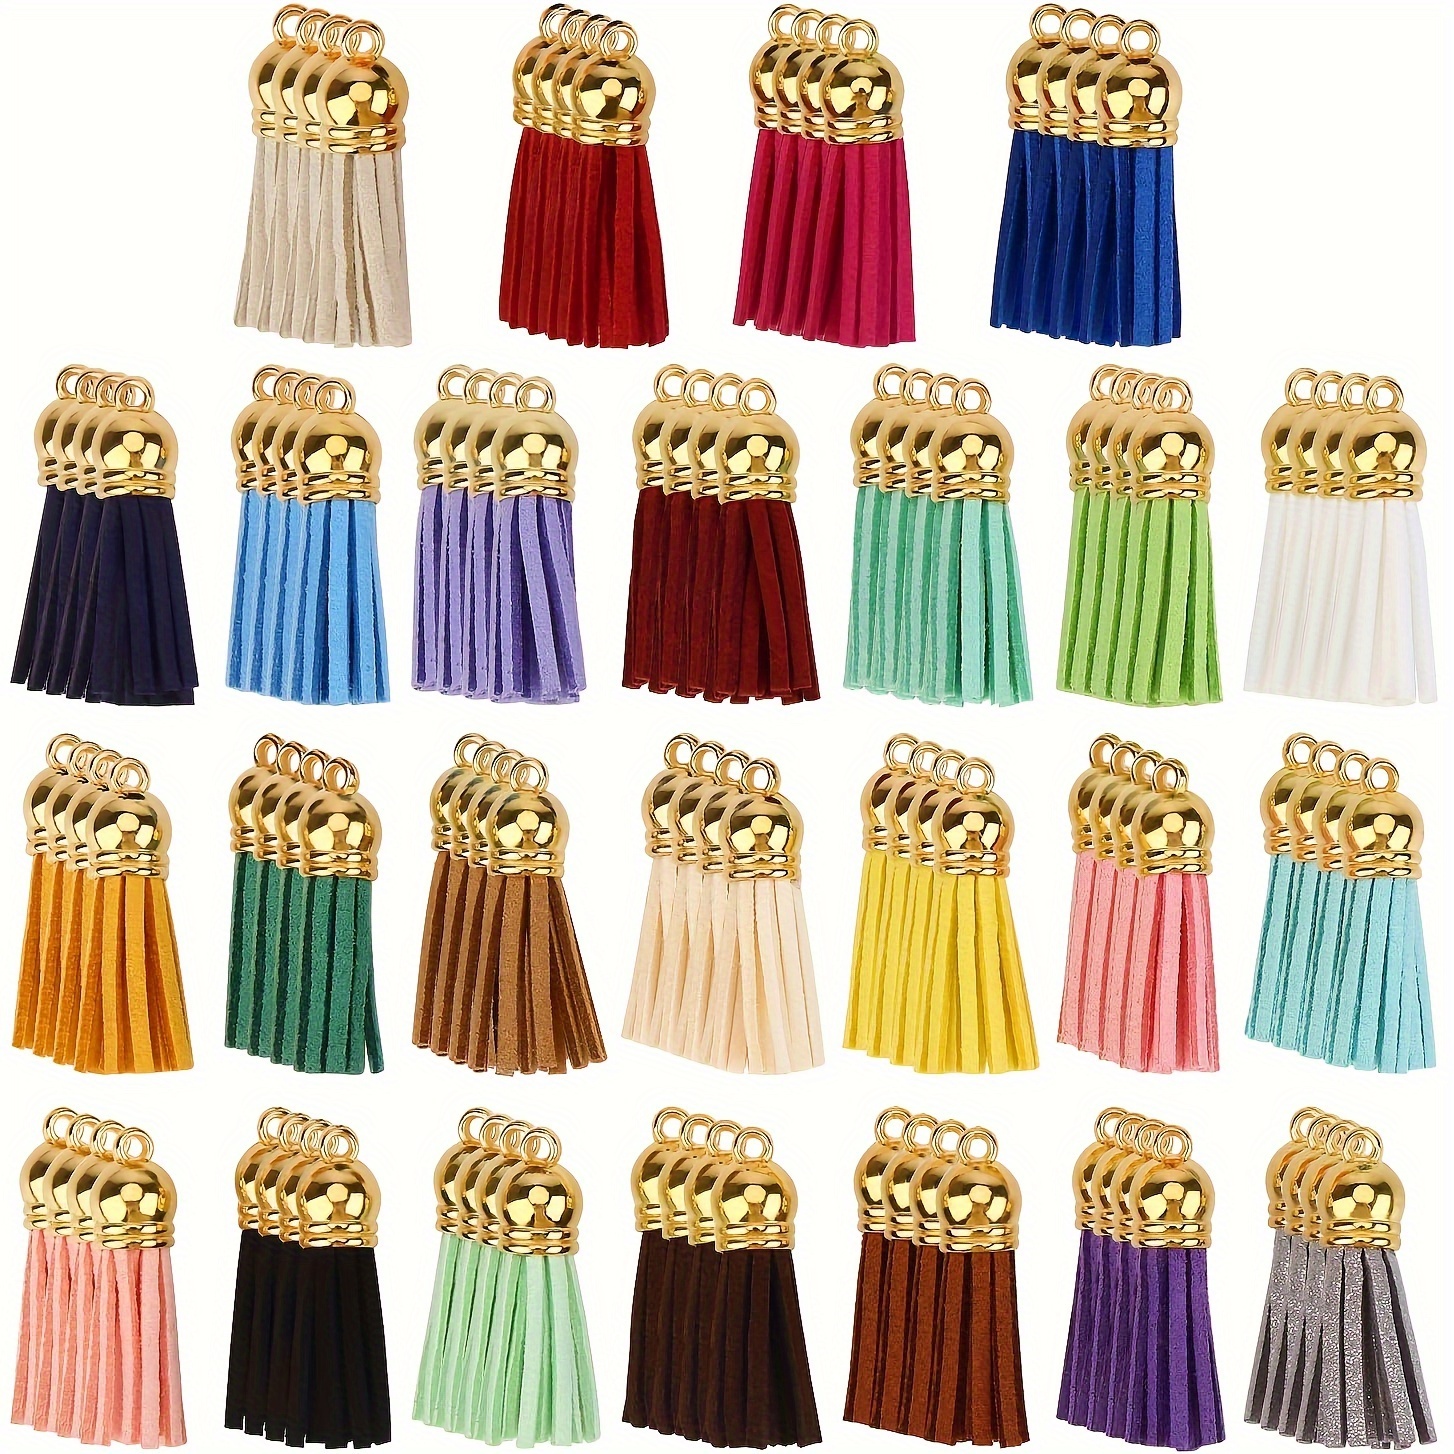 

100pcs 25 Colors Elegant Pu Leather Tassels Set With Golden Caps, Diy Craft Accessory For Jewelry, Earrings, Pendants, Keychains, Dense Material, Easy Attach Hoop Design